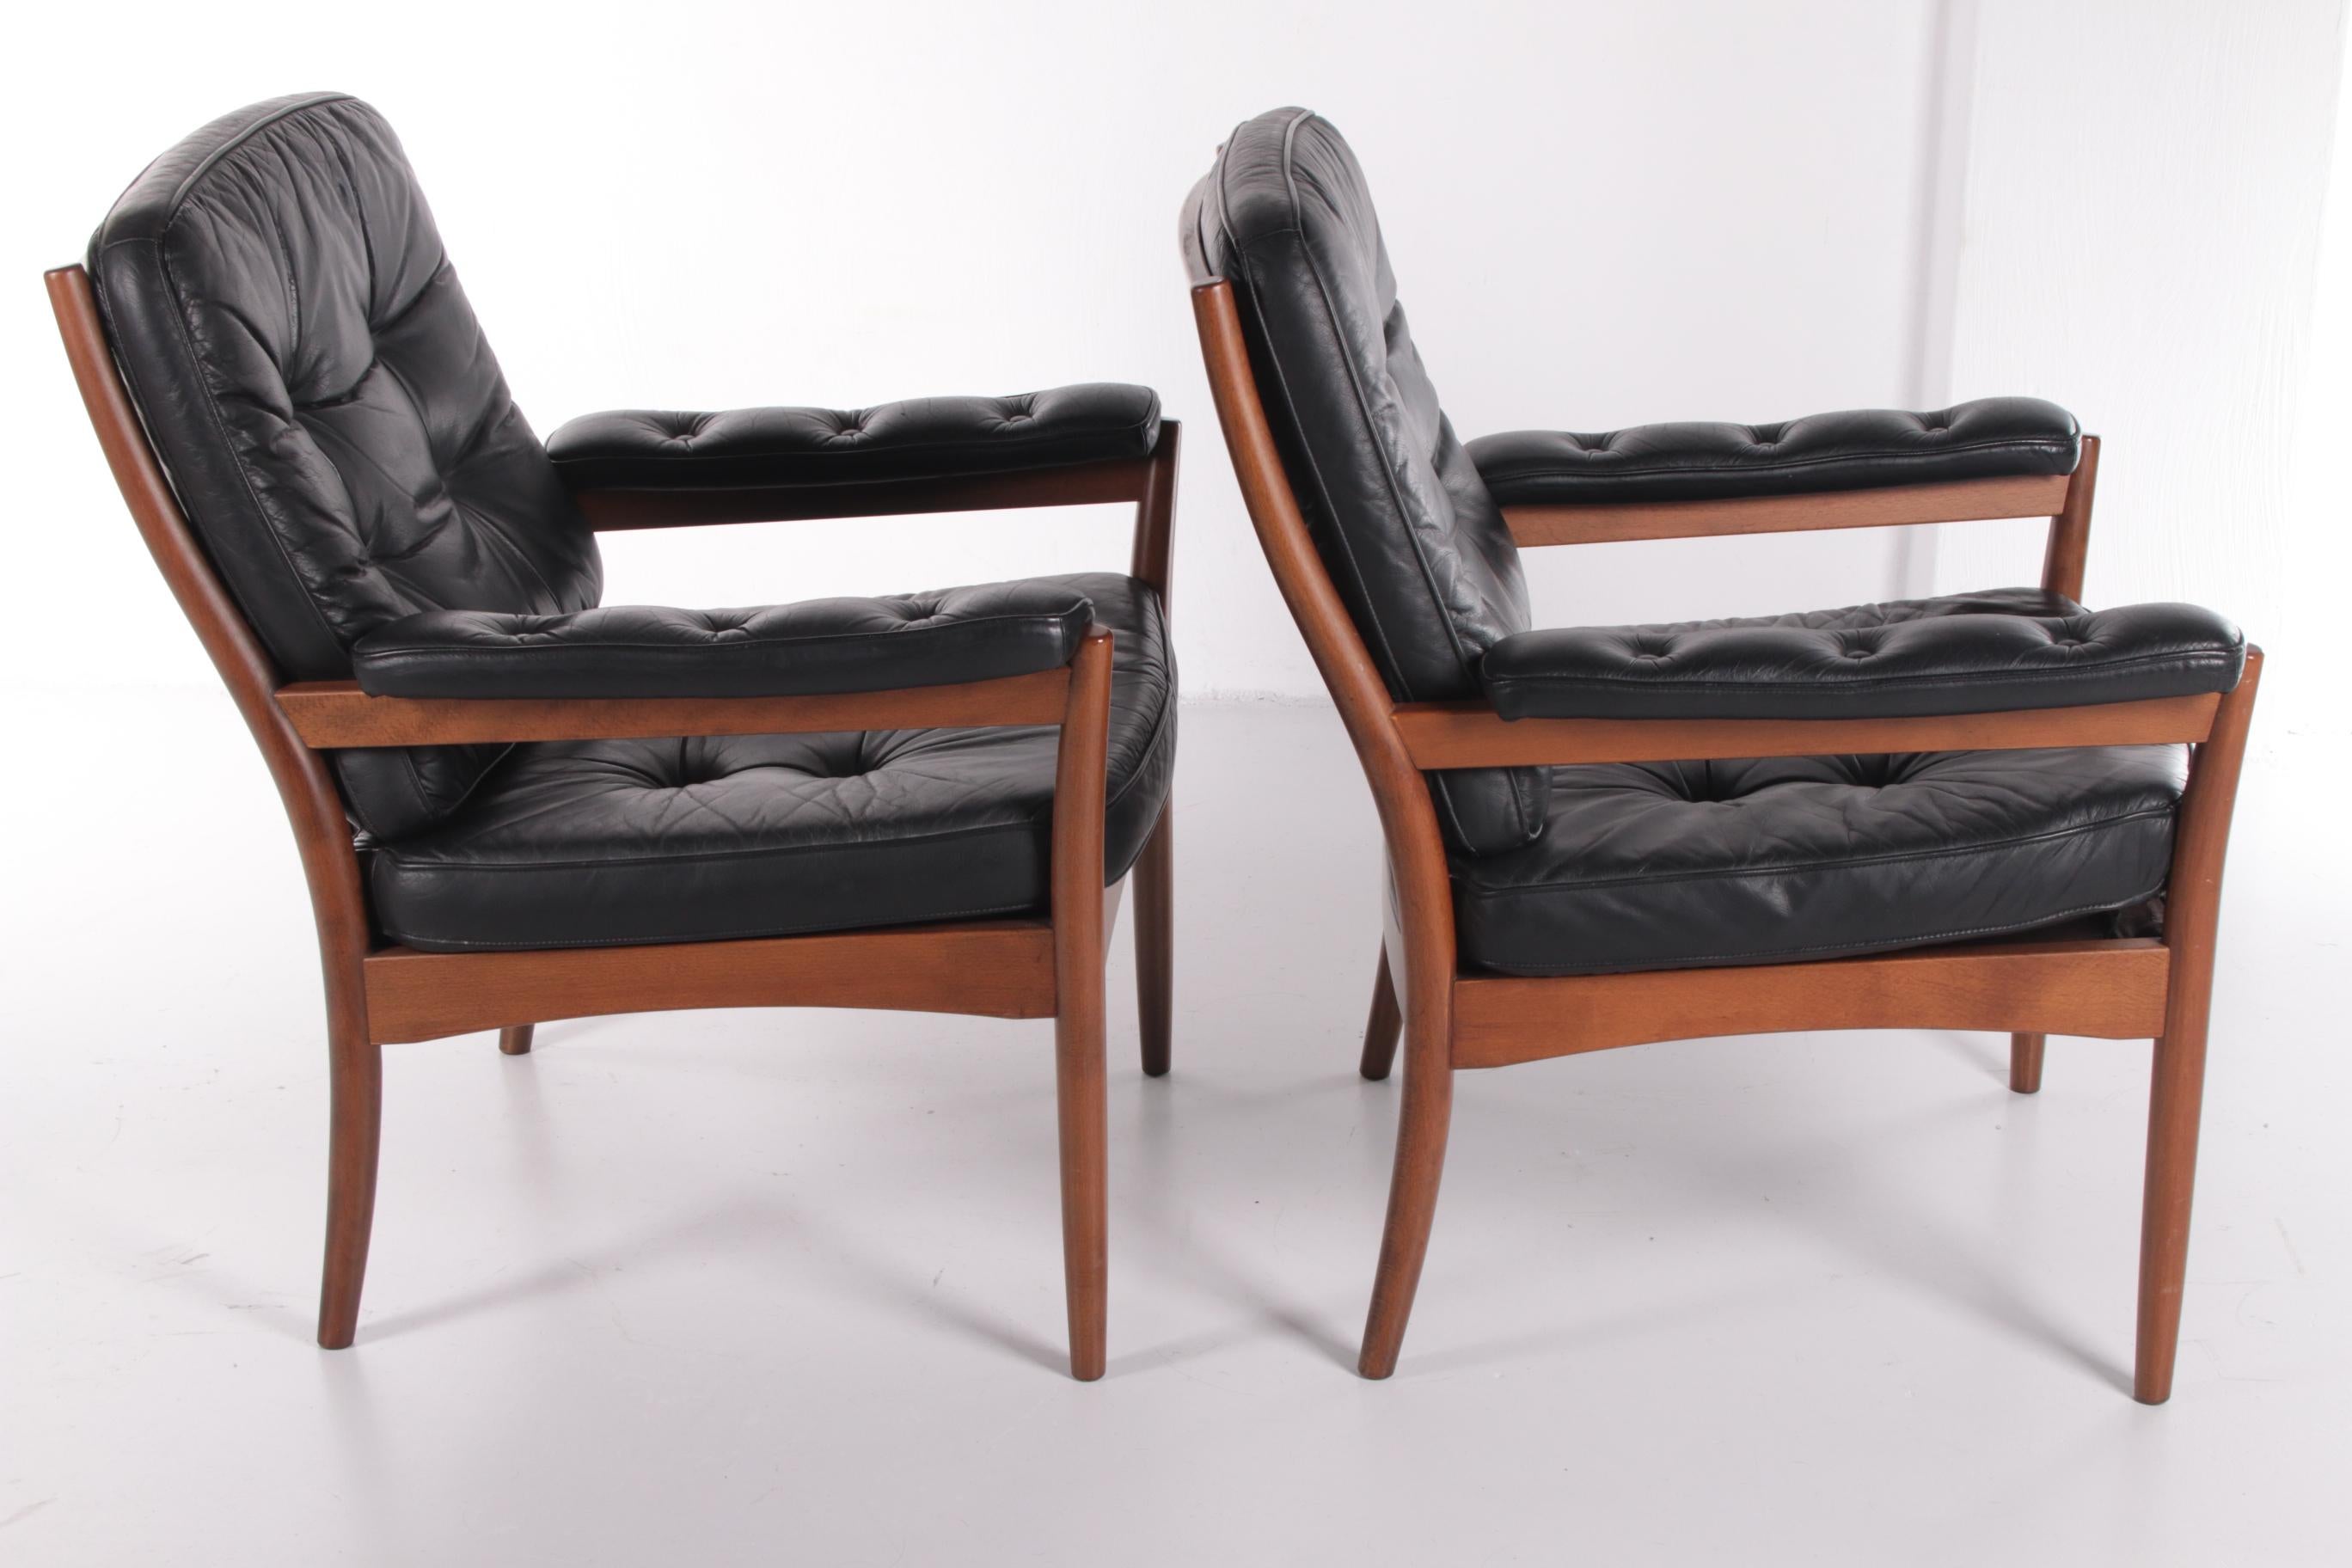 Late 20th Century Vintage Set of 2 Lounge Chairs by Gote Mobler Nassjo, Sweden, 1970s